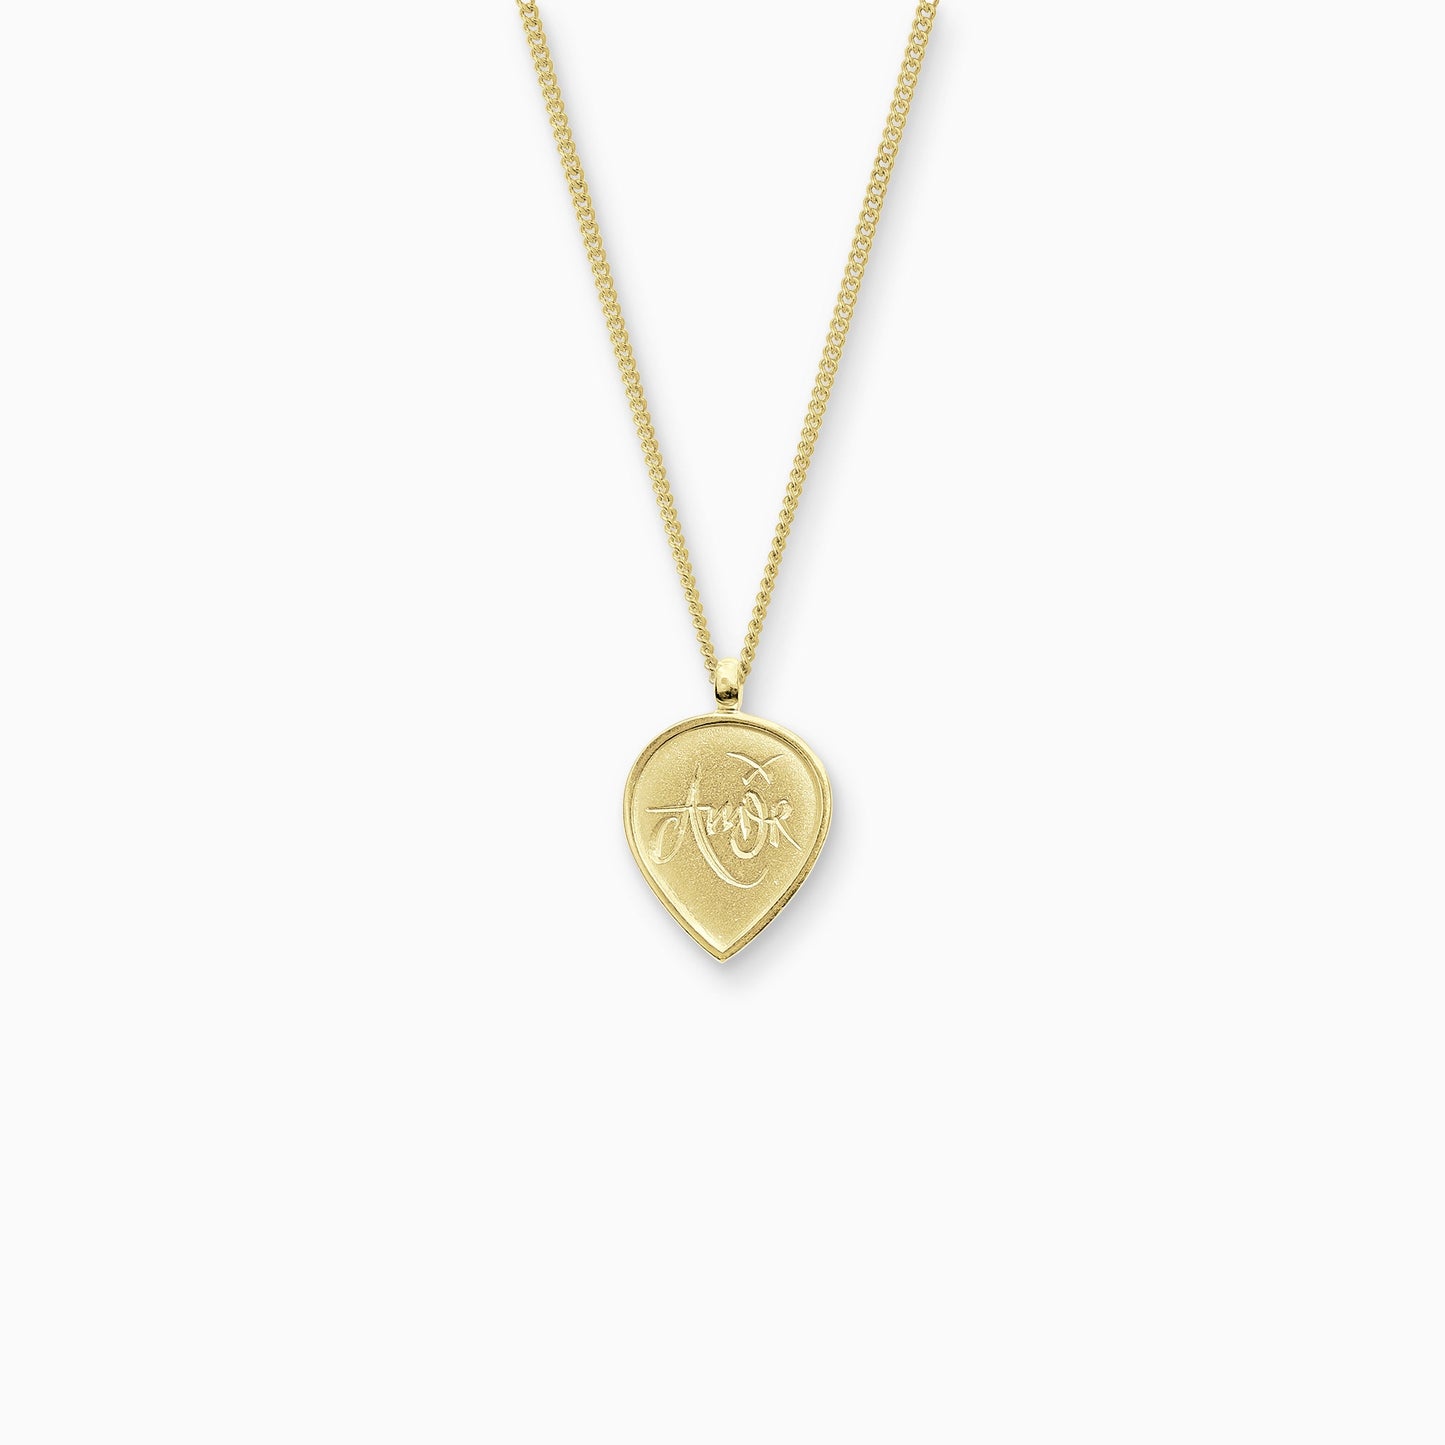 18ct Fairtrade yellow gold  teardrop shaped pendant, 25cm x 16mm on a 45cm fine curb chain. Amor, the Latin for Love is inscribed in a handwritten script on the front of the pendant.